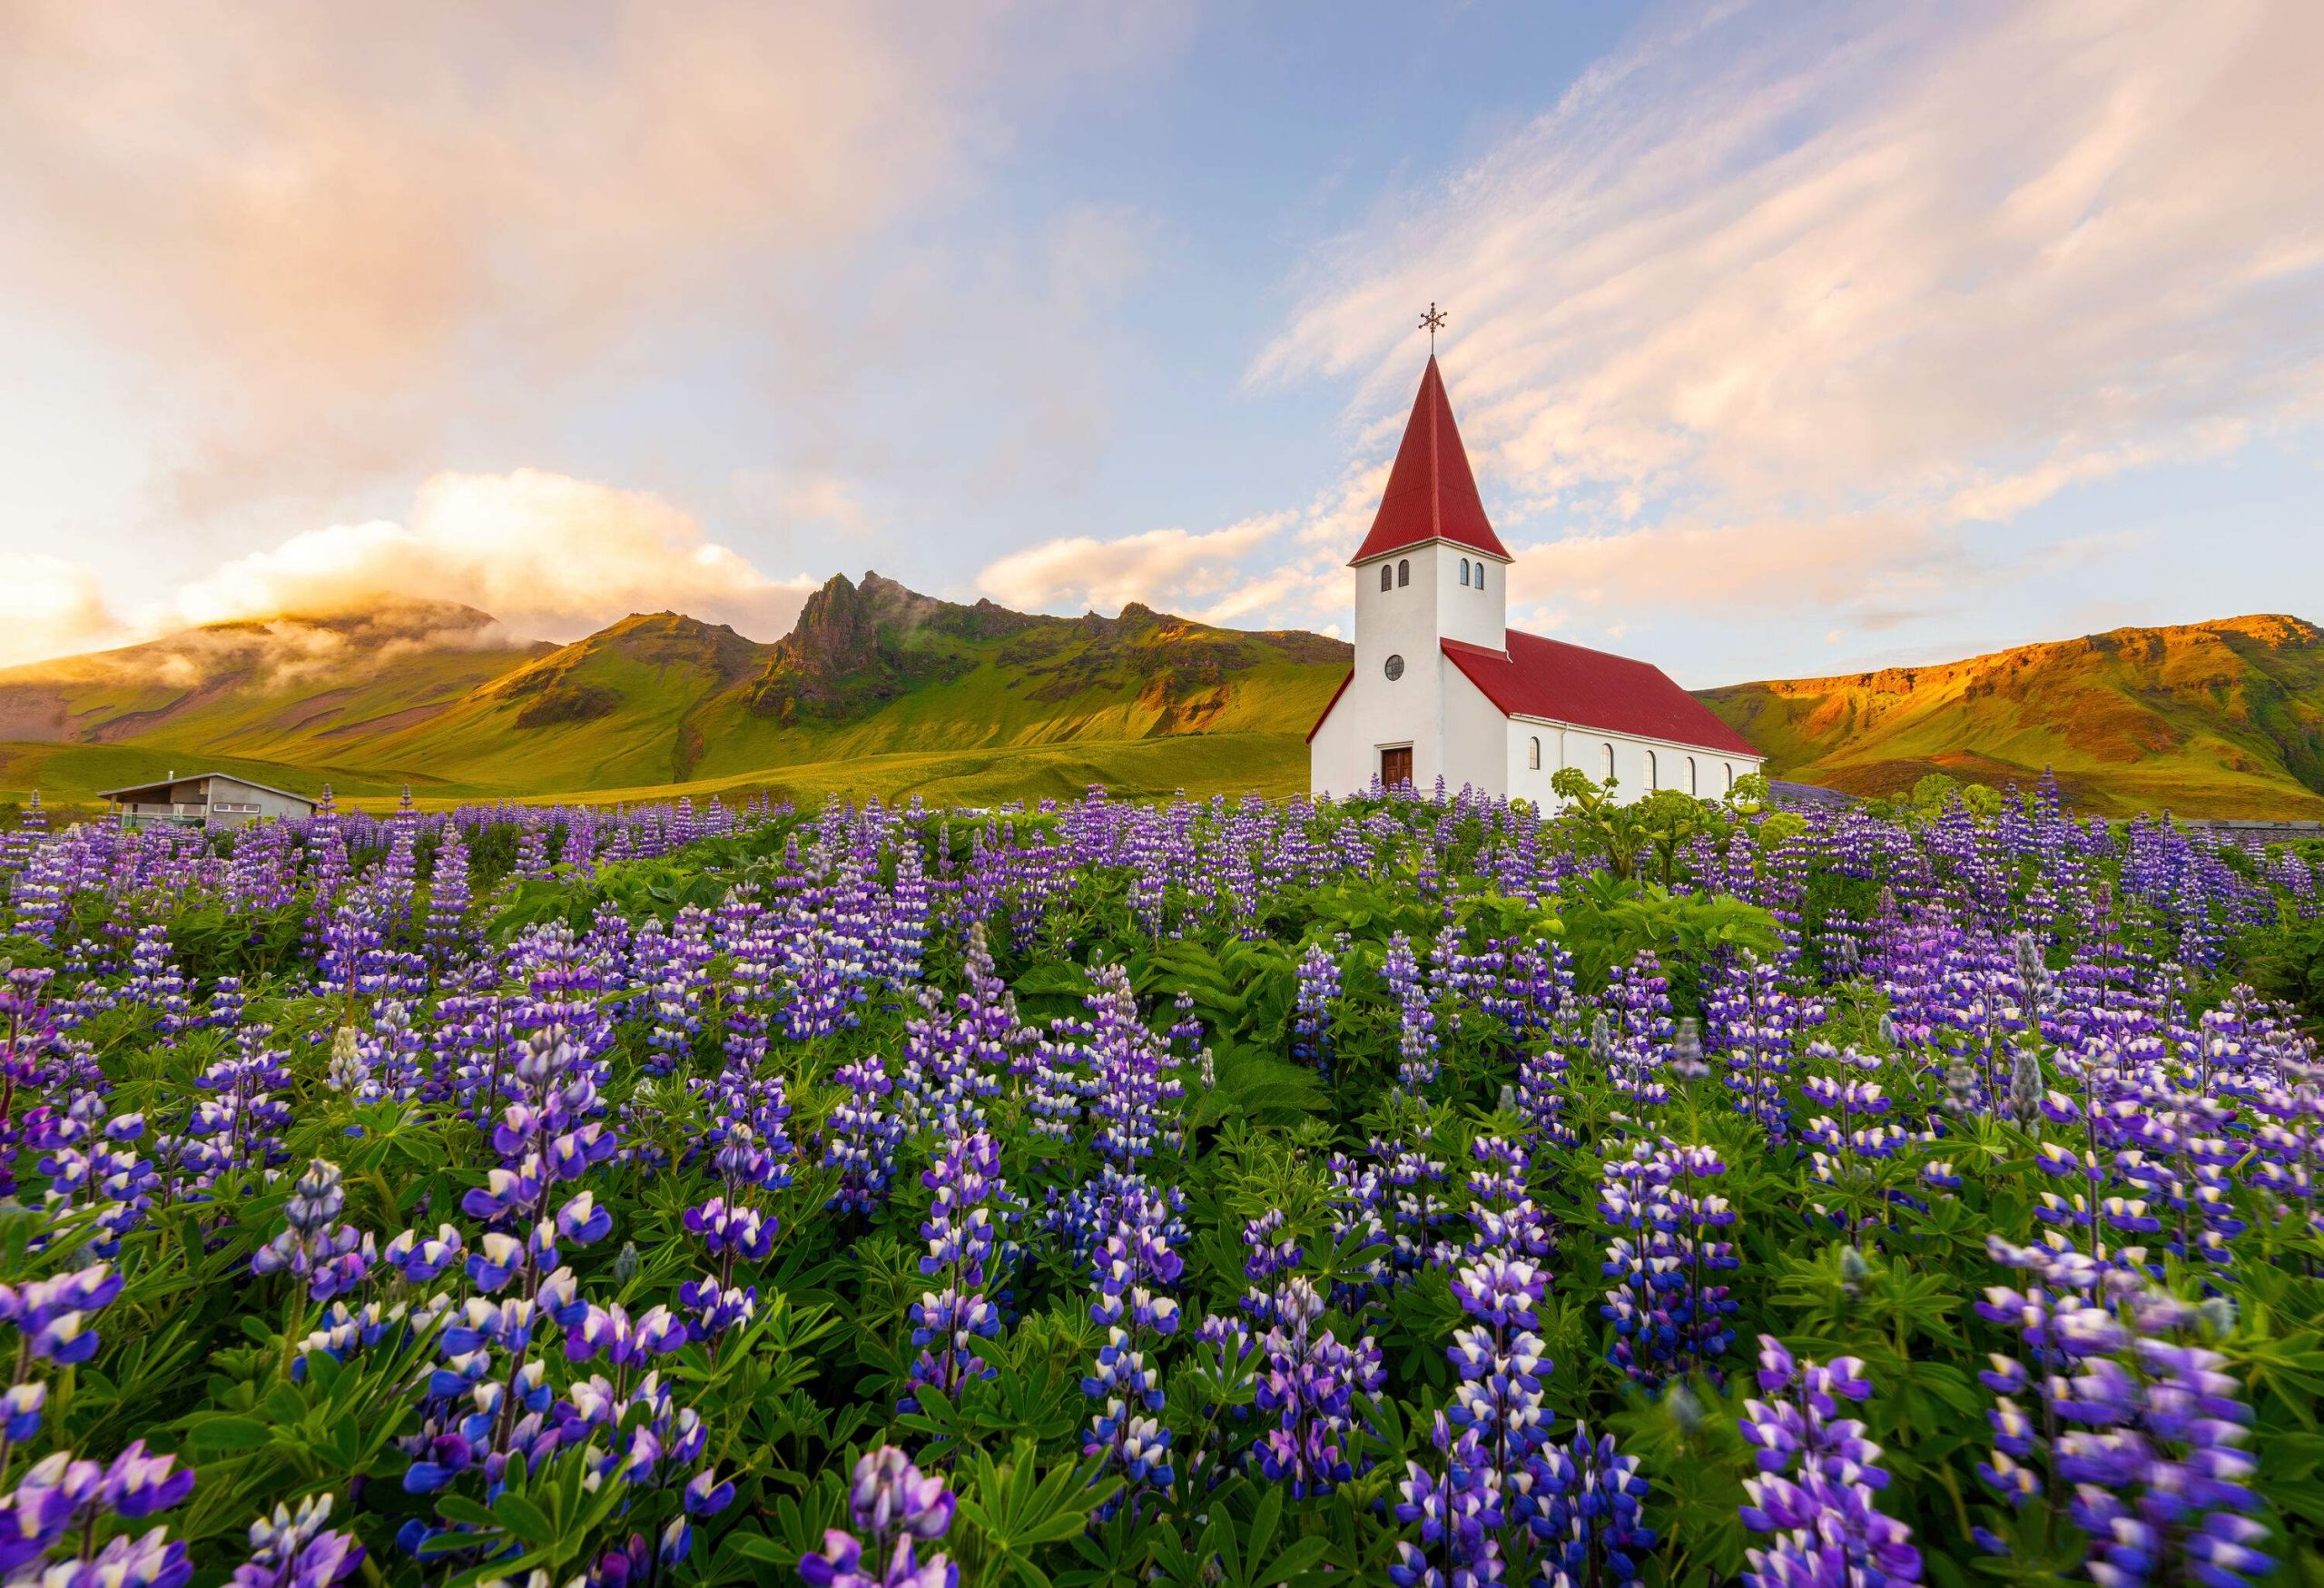 A small white church with a red roof lies on the mountainside, surrounded by lush lupine flowers in full bloom.